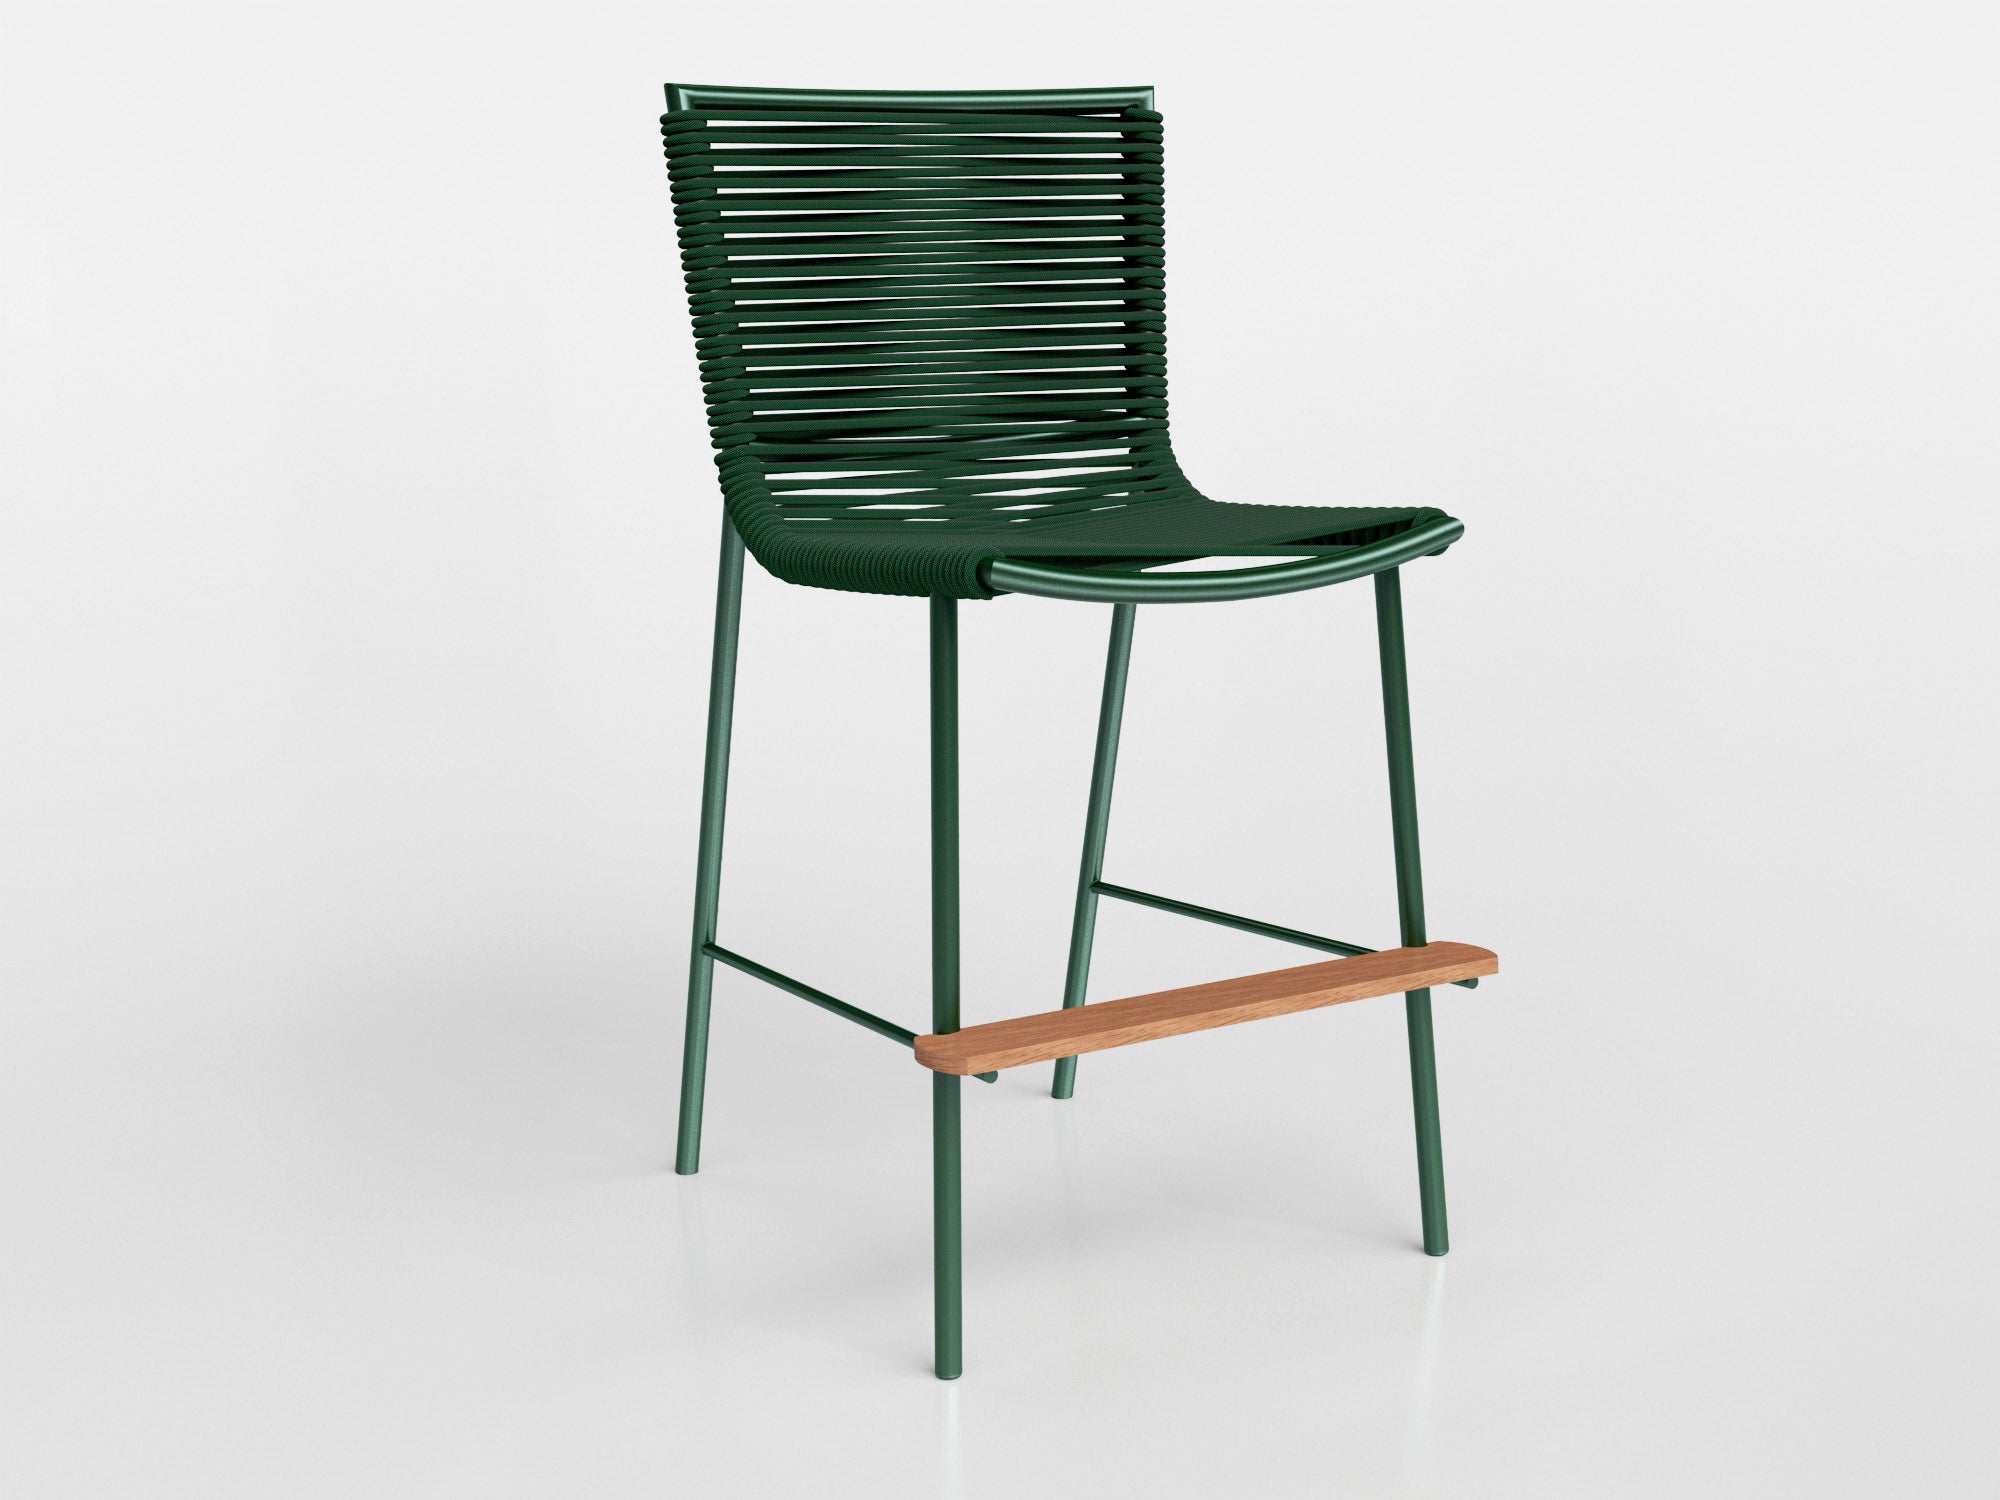 Amado Bar Stool in green nautical rope, aluminium and wooden foot support, designed by Alfio Lisi